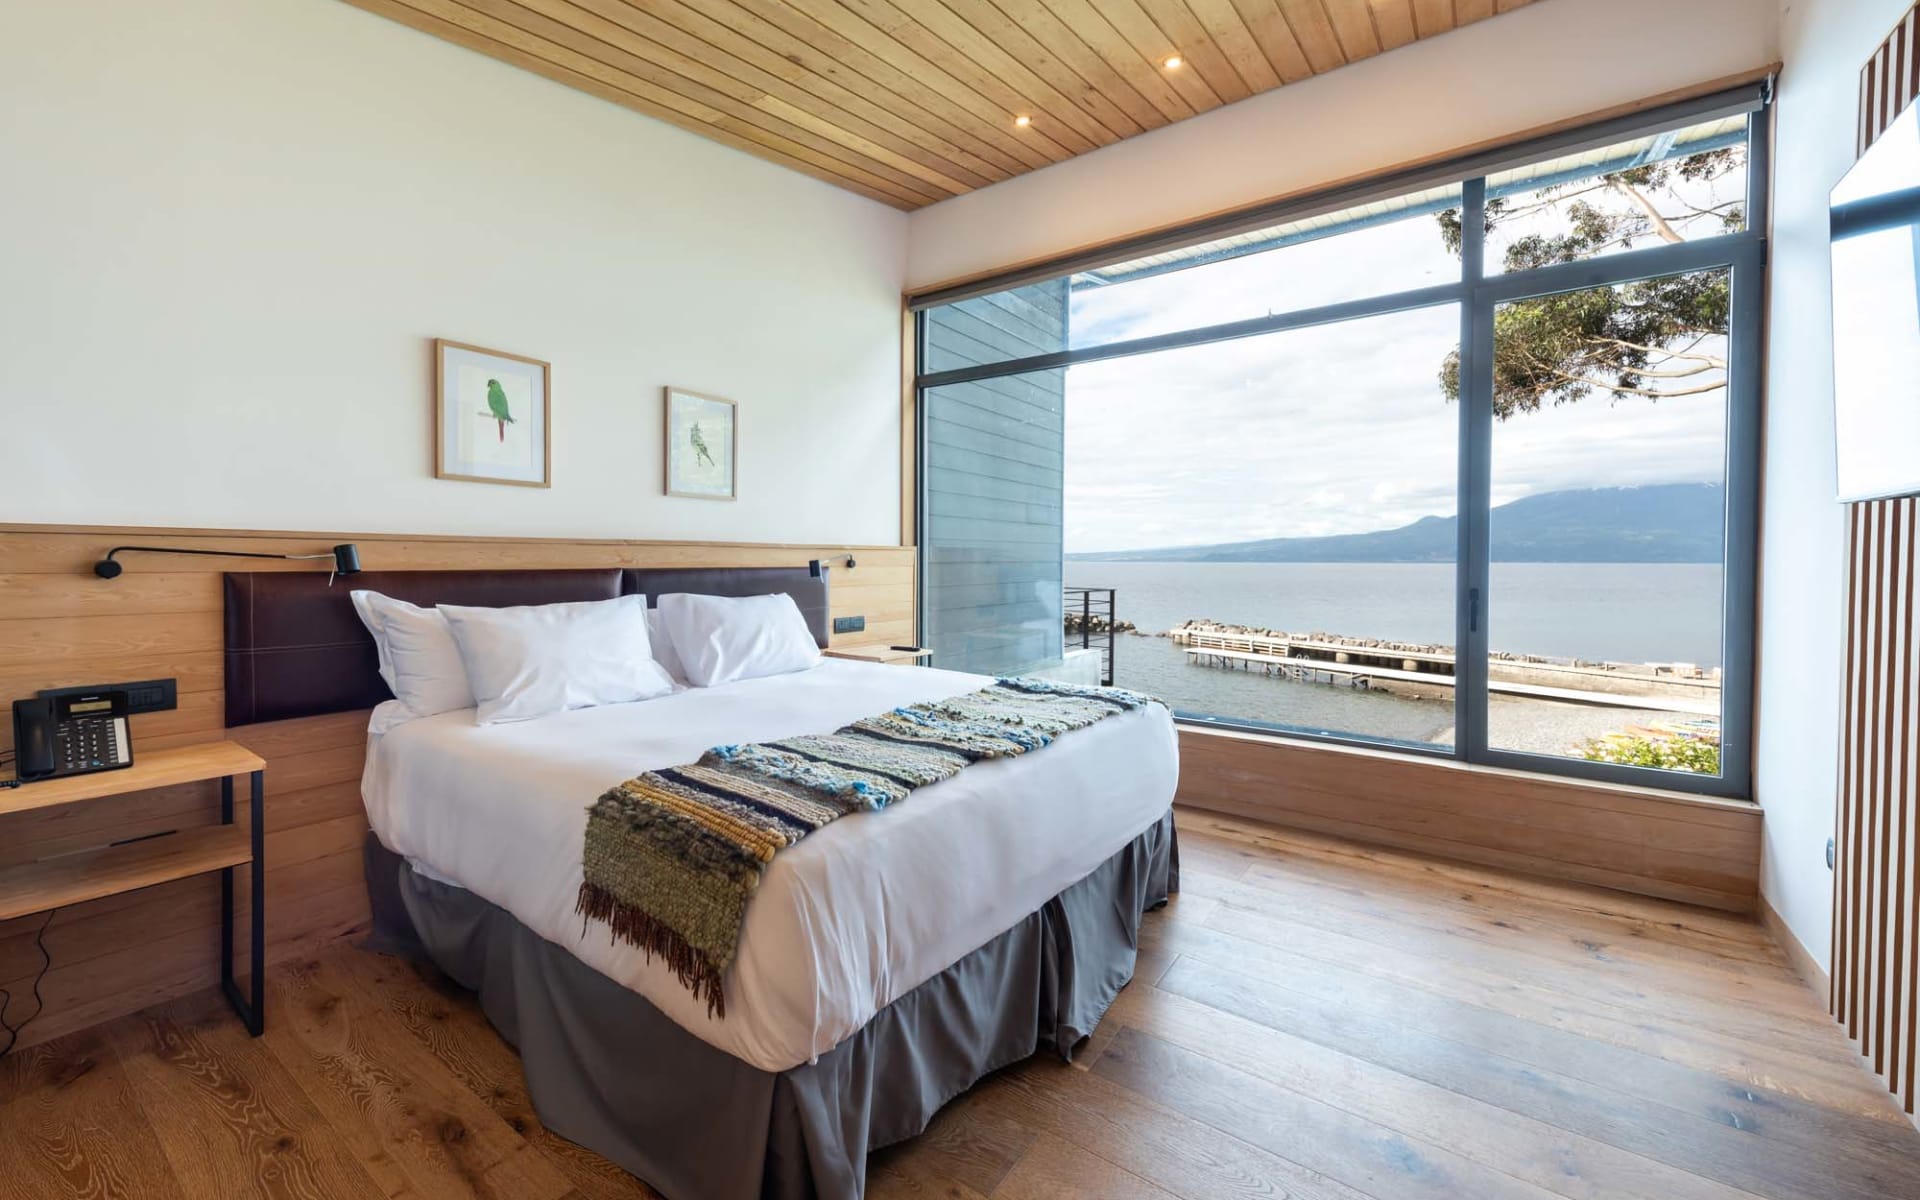 A double bed sits beside a large window overlooking the pier and lake. 